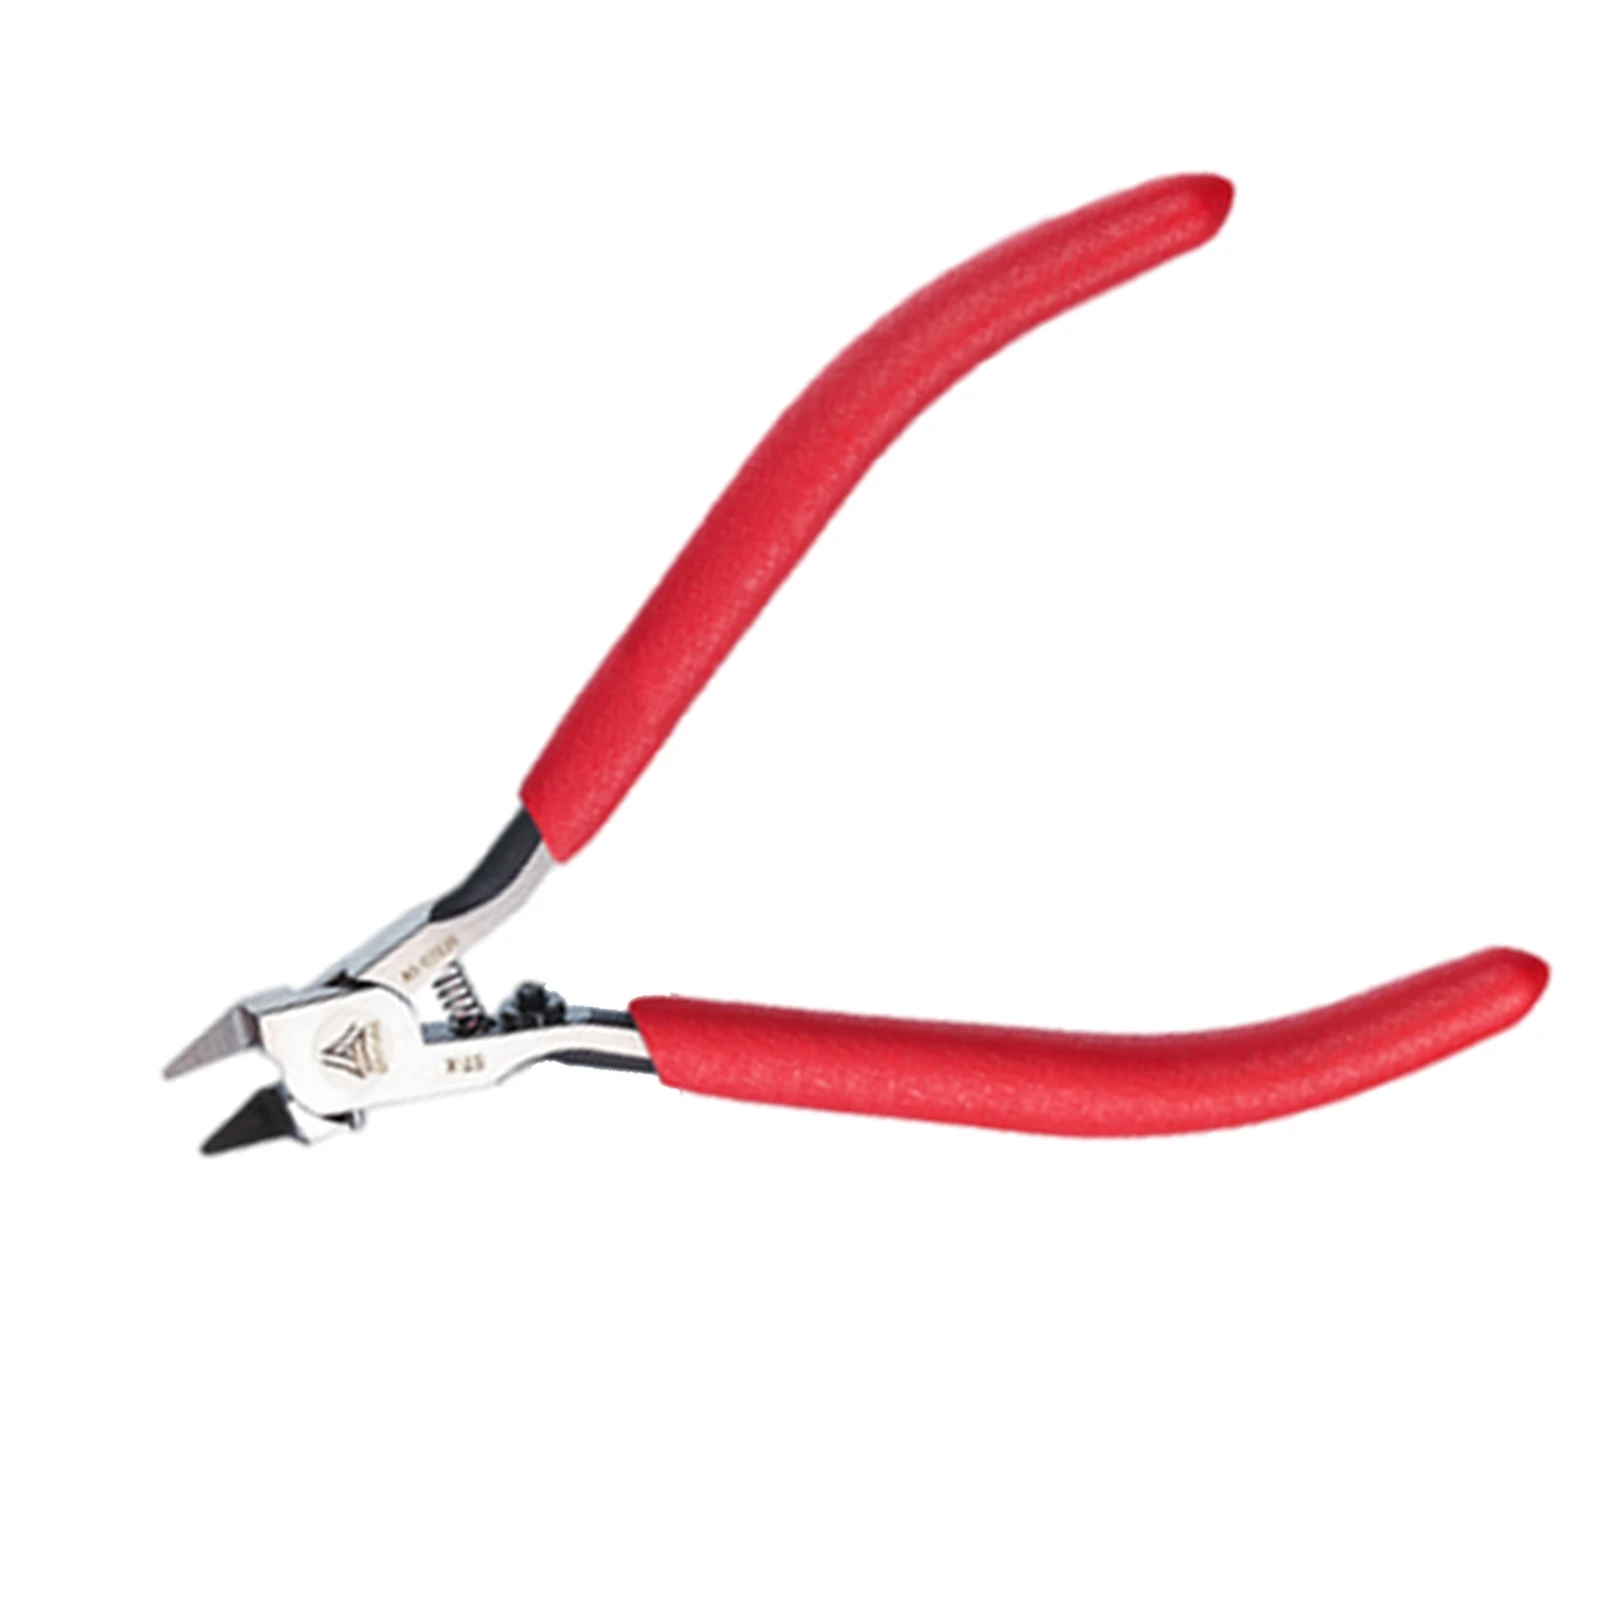 DSPIAE 2023 New ST-A Single Blade Nipper 3.0 Hand Tools Pliers